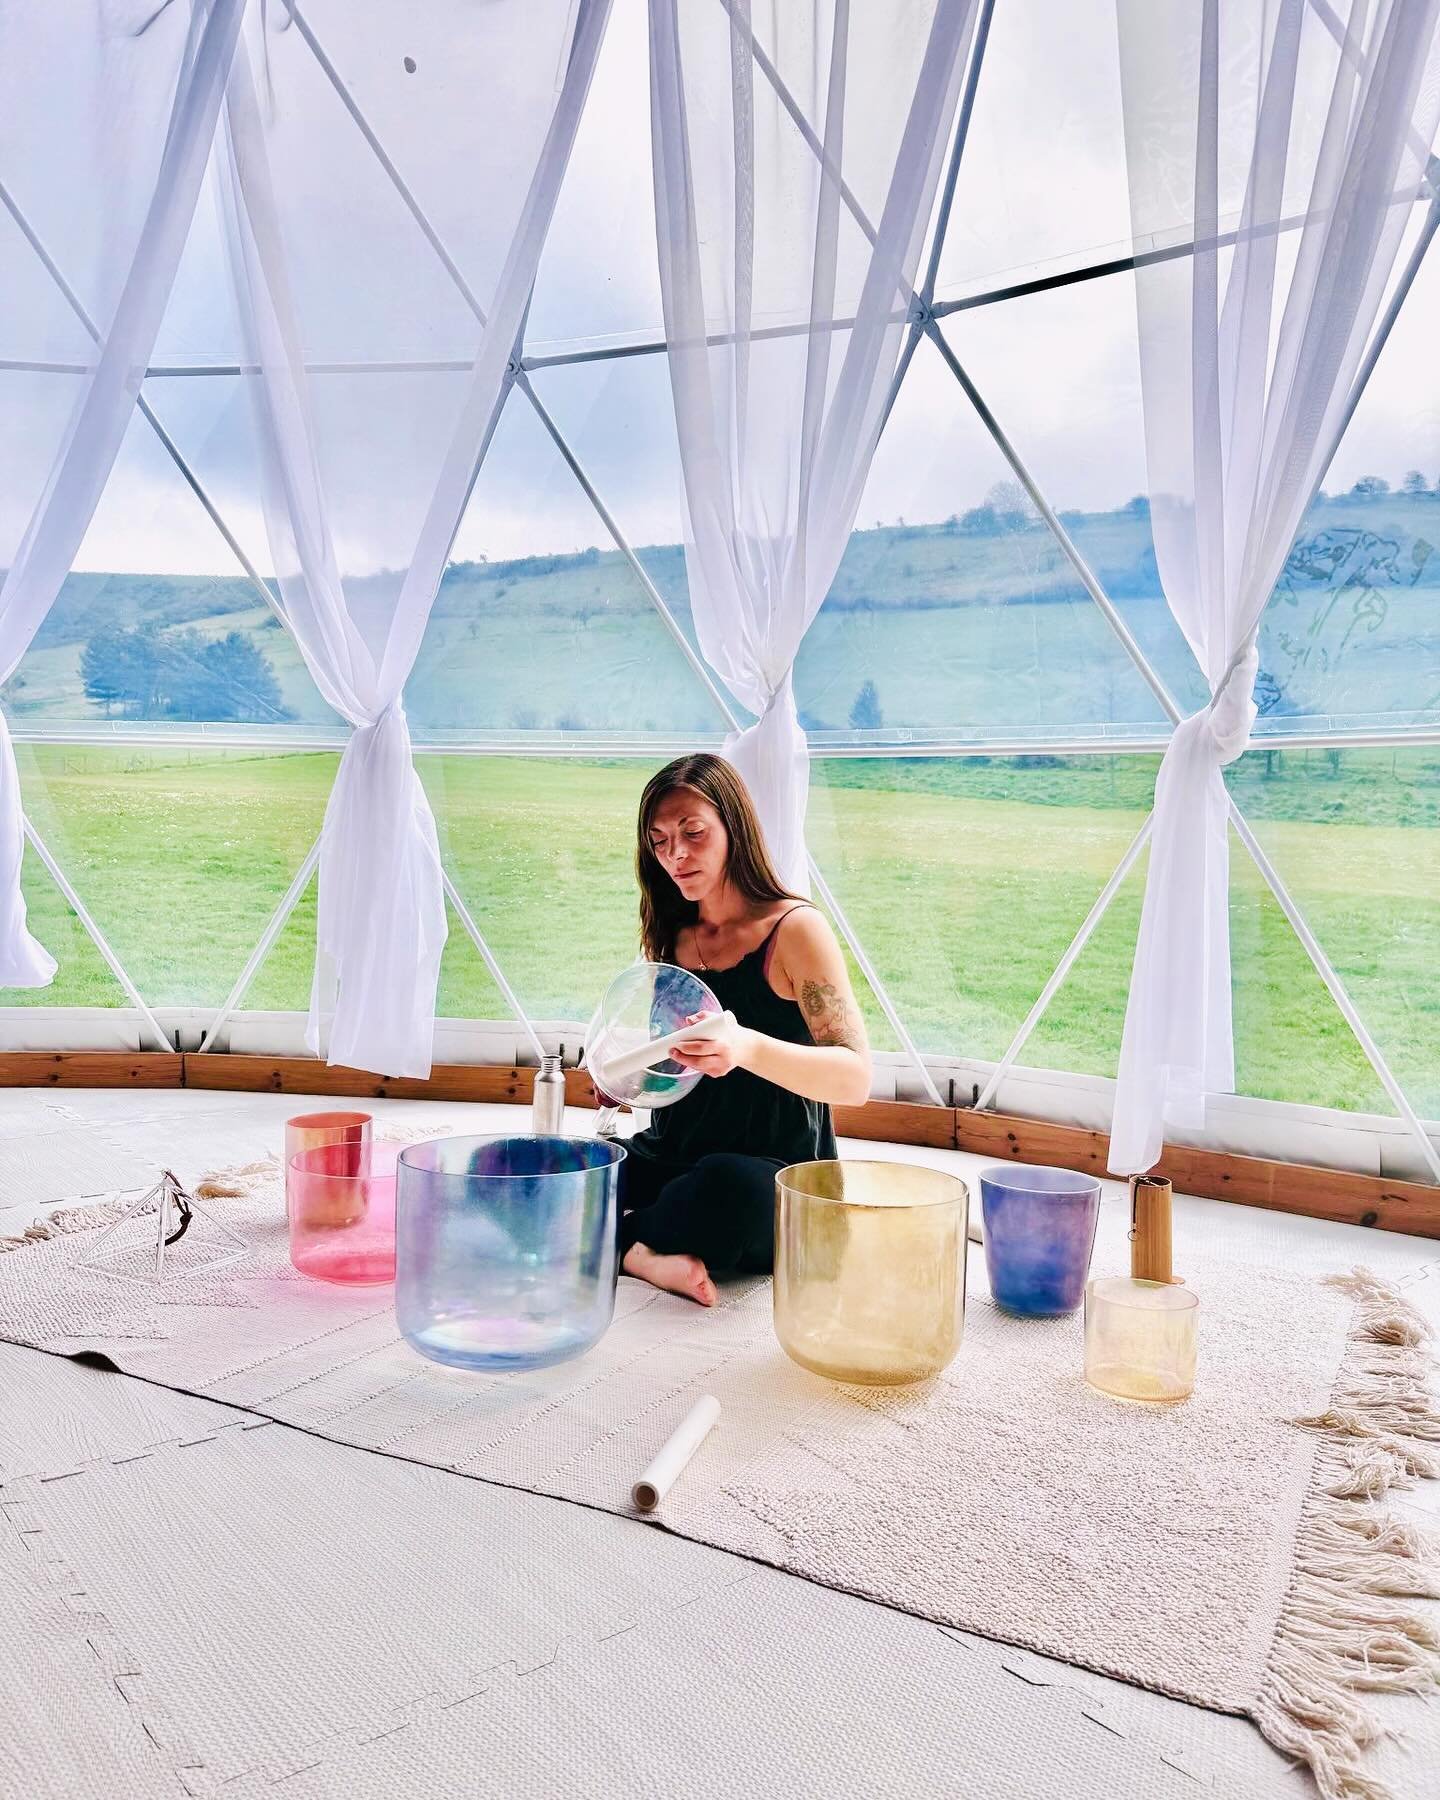 Still flying after sharing the most magical sound bath this weekend with @wearewildwoman in the gorgeous setting created by @innerbloomuk. What a dreamy spot. Thank you @donnalouisehay for inviting me to be part of your beautiful healing day, you&rsq